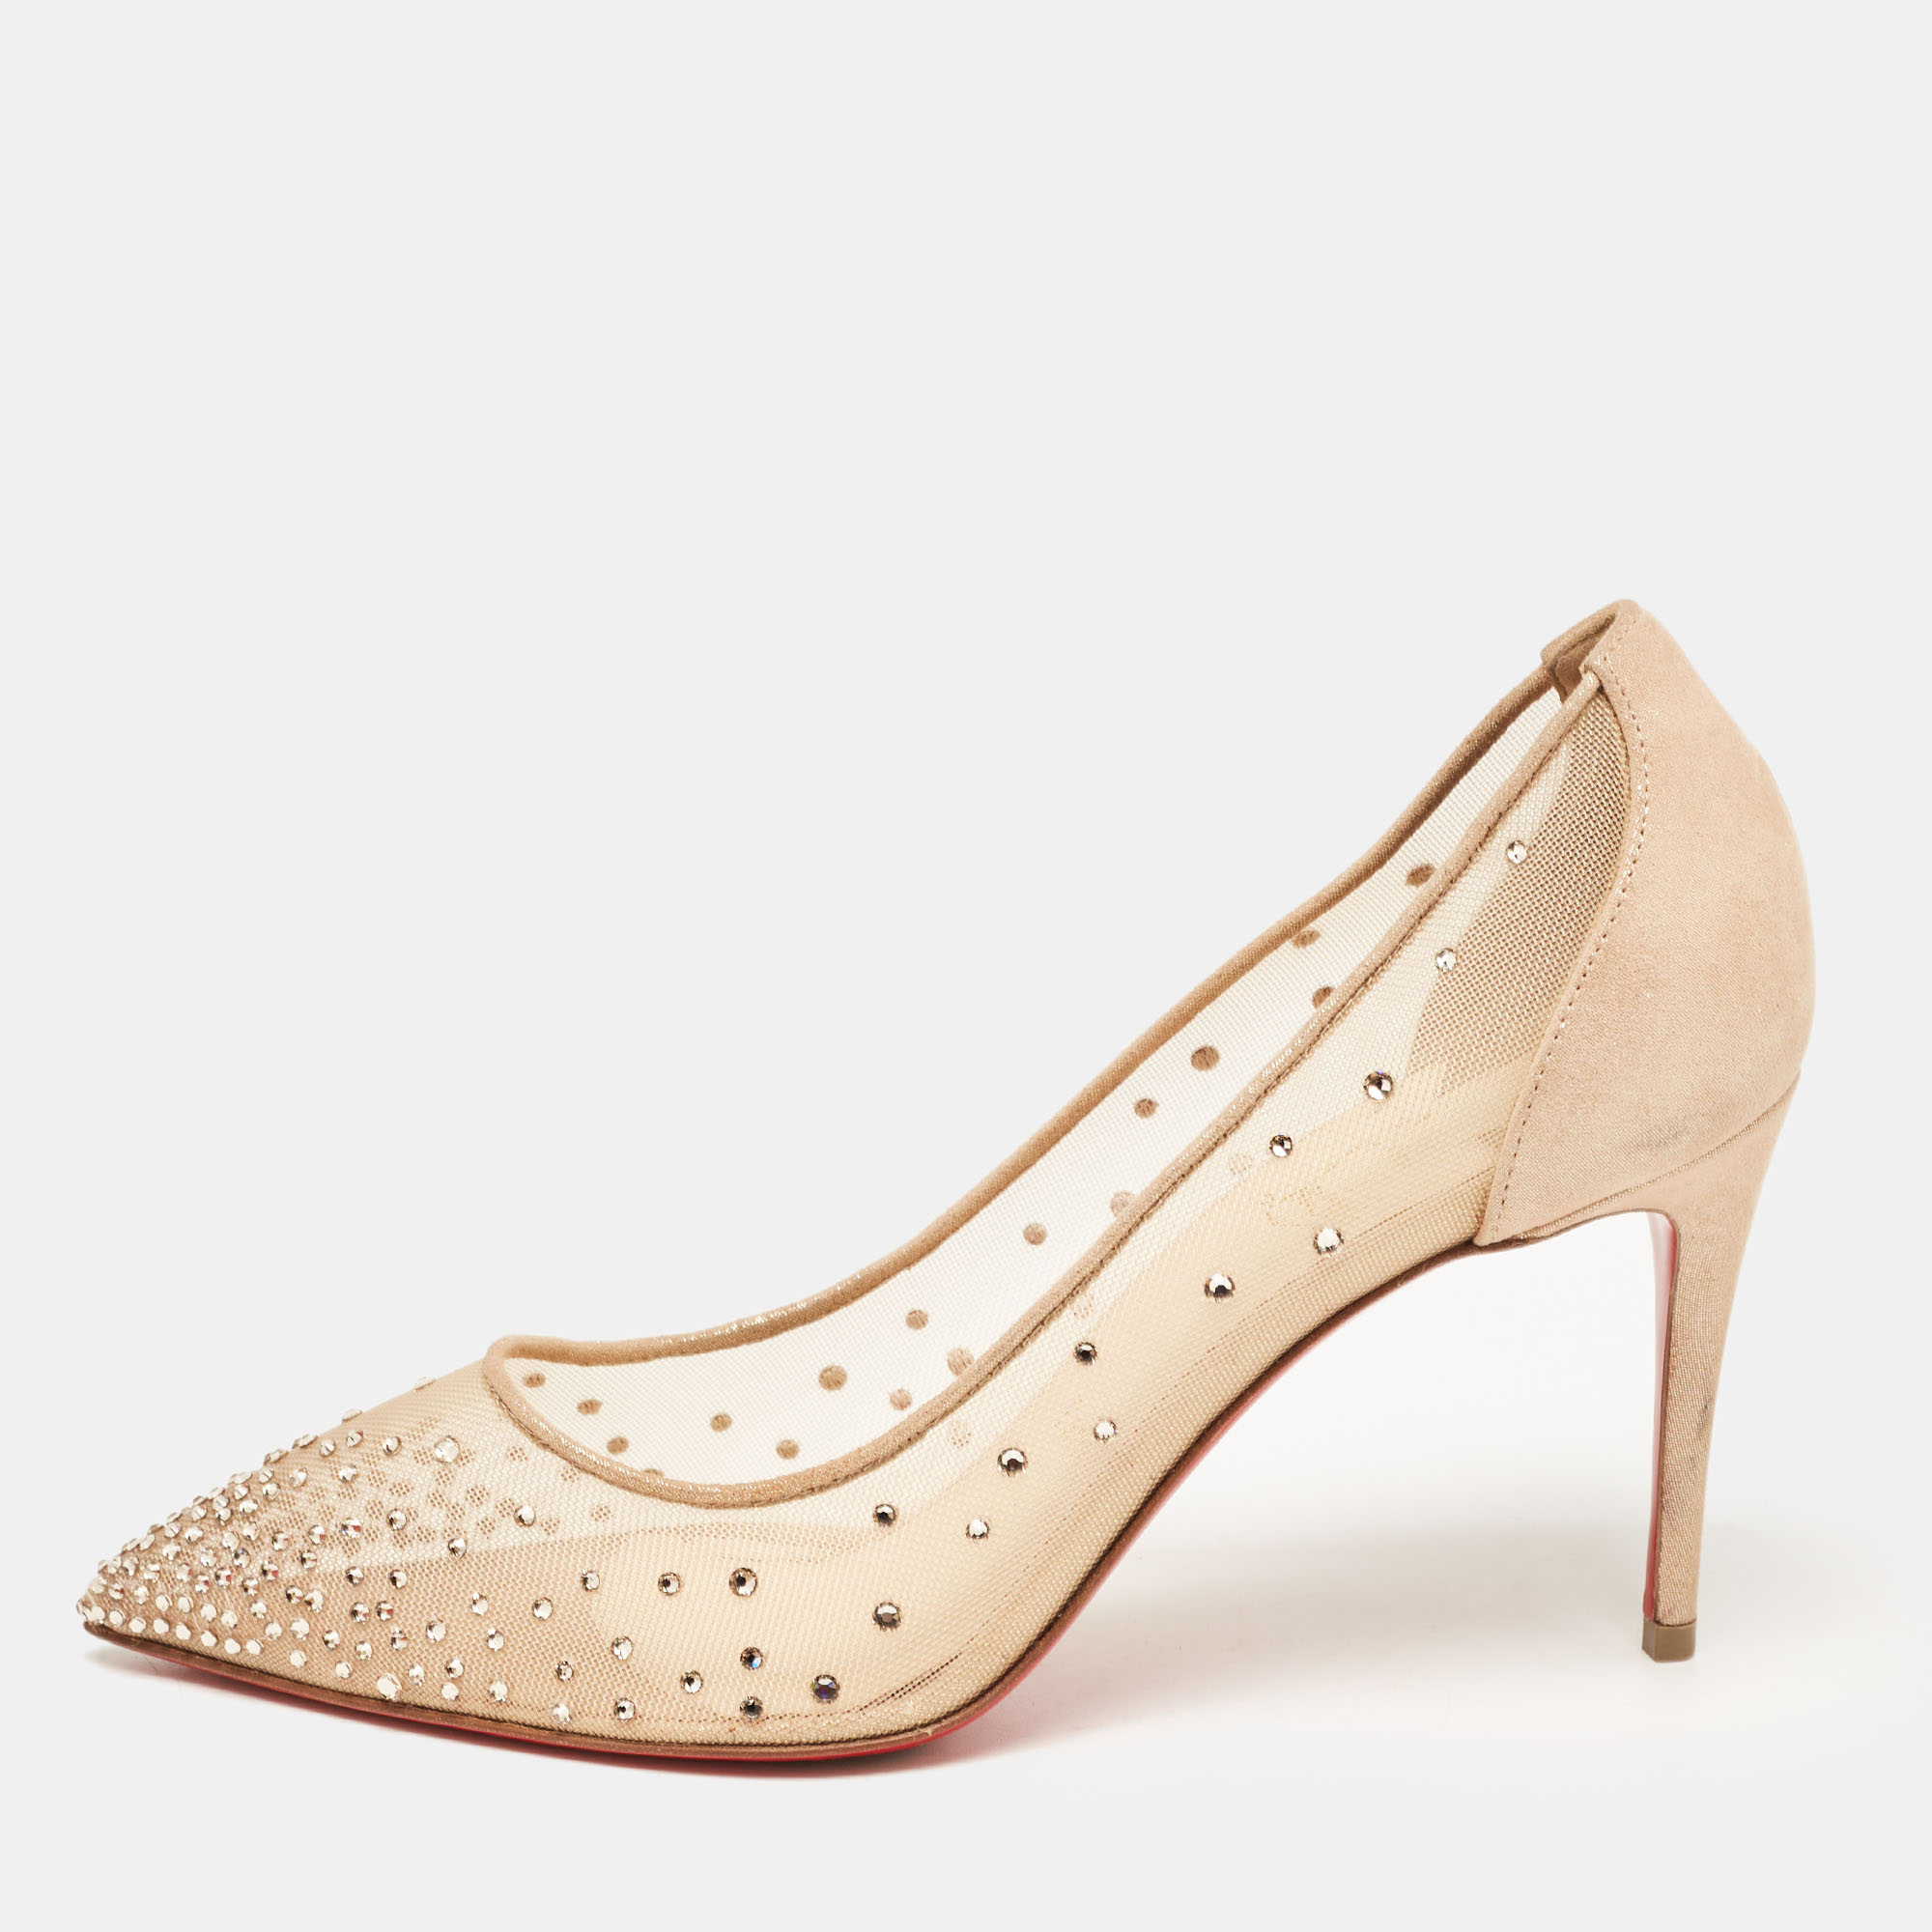 Christian Louboutin Beige Mesh And Laminated Suede Follies Strass Pumps Size 37.5